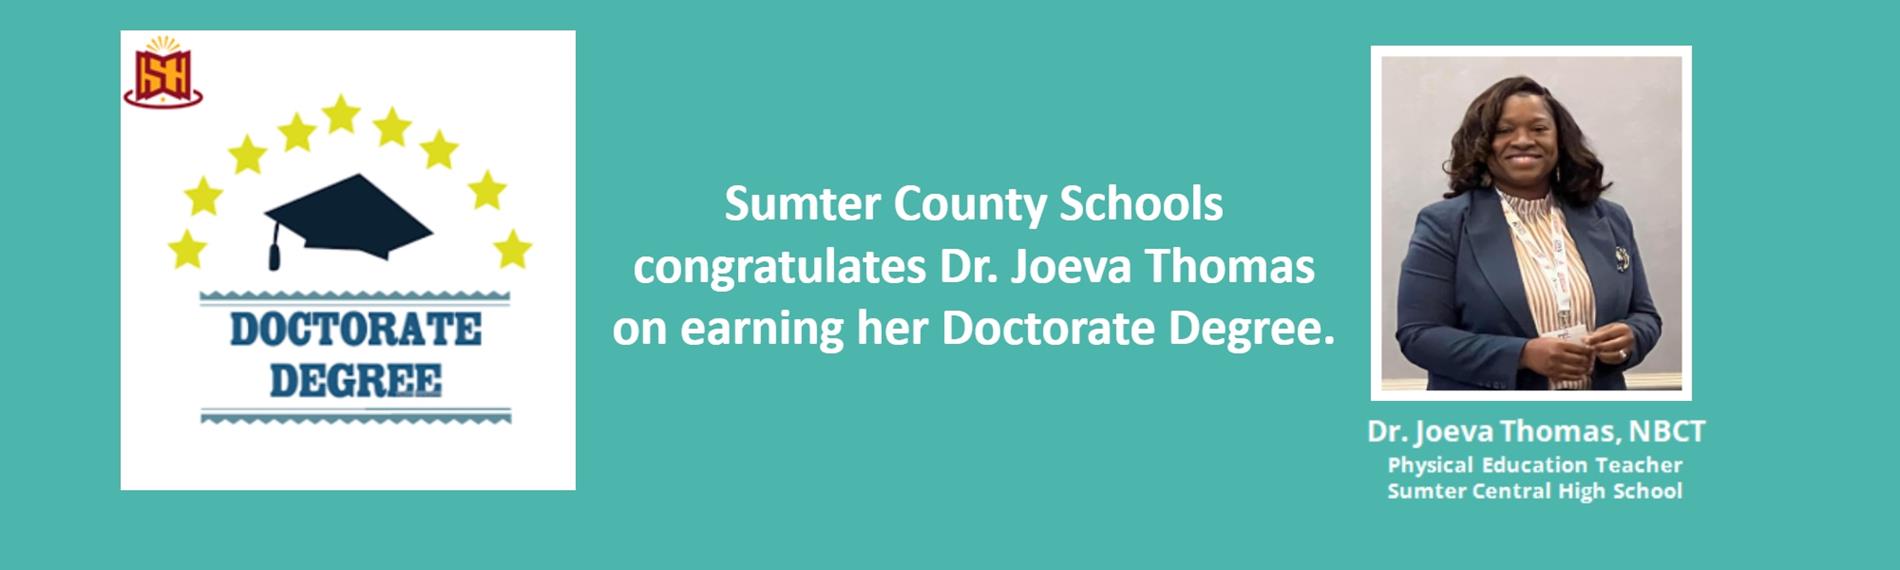 Sumter County Schools congratulates Dr. Joeva Thomas on earning her Doctorate Degree.